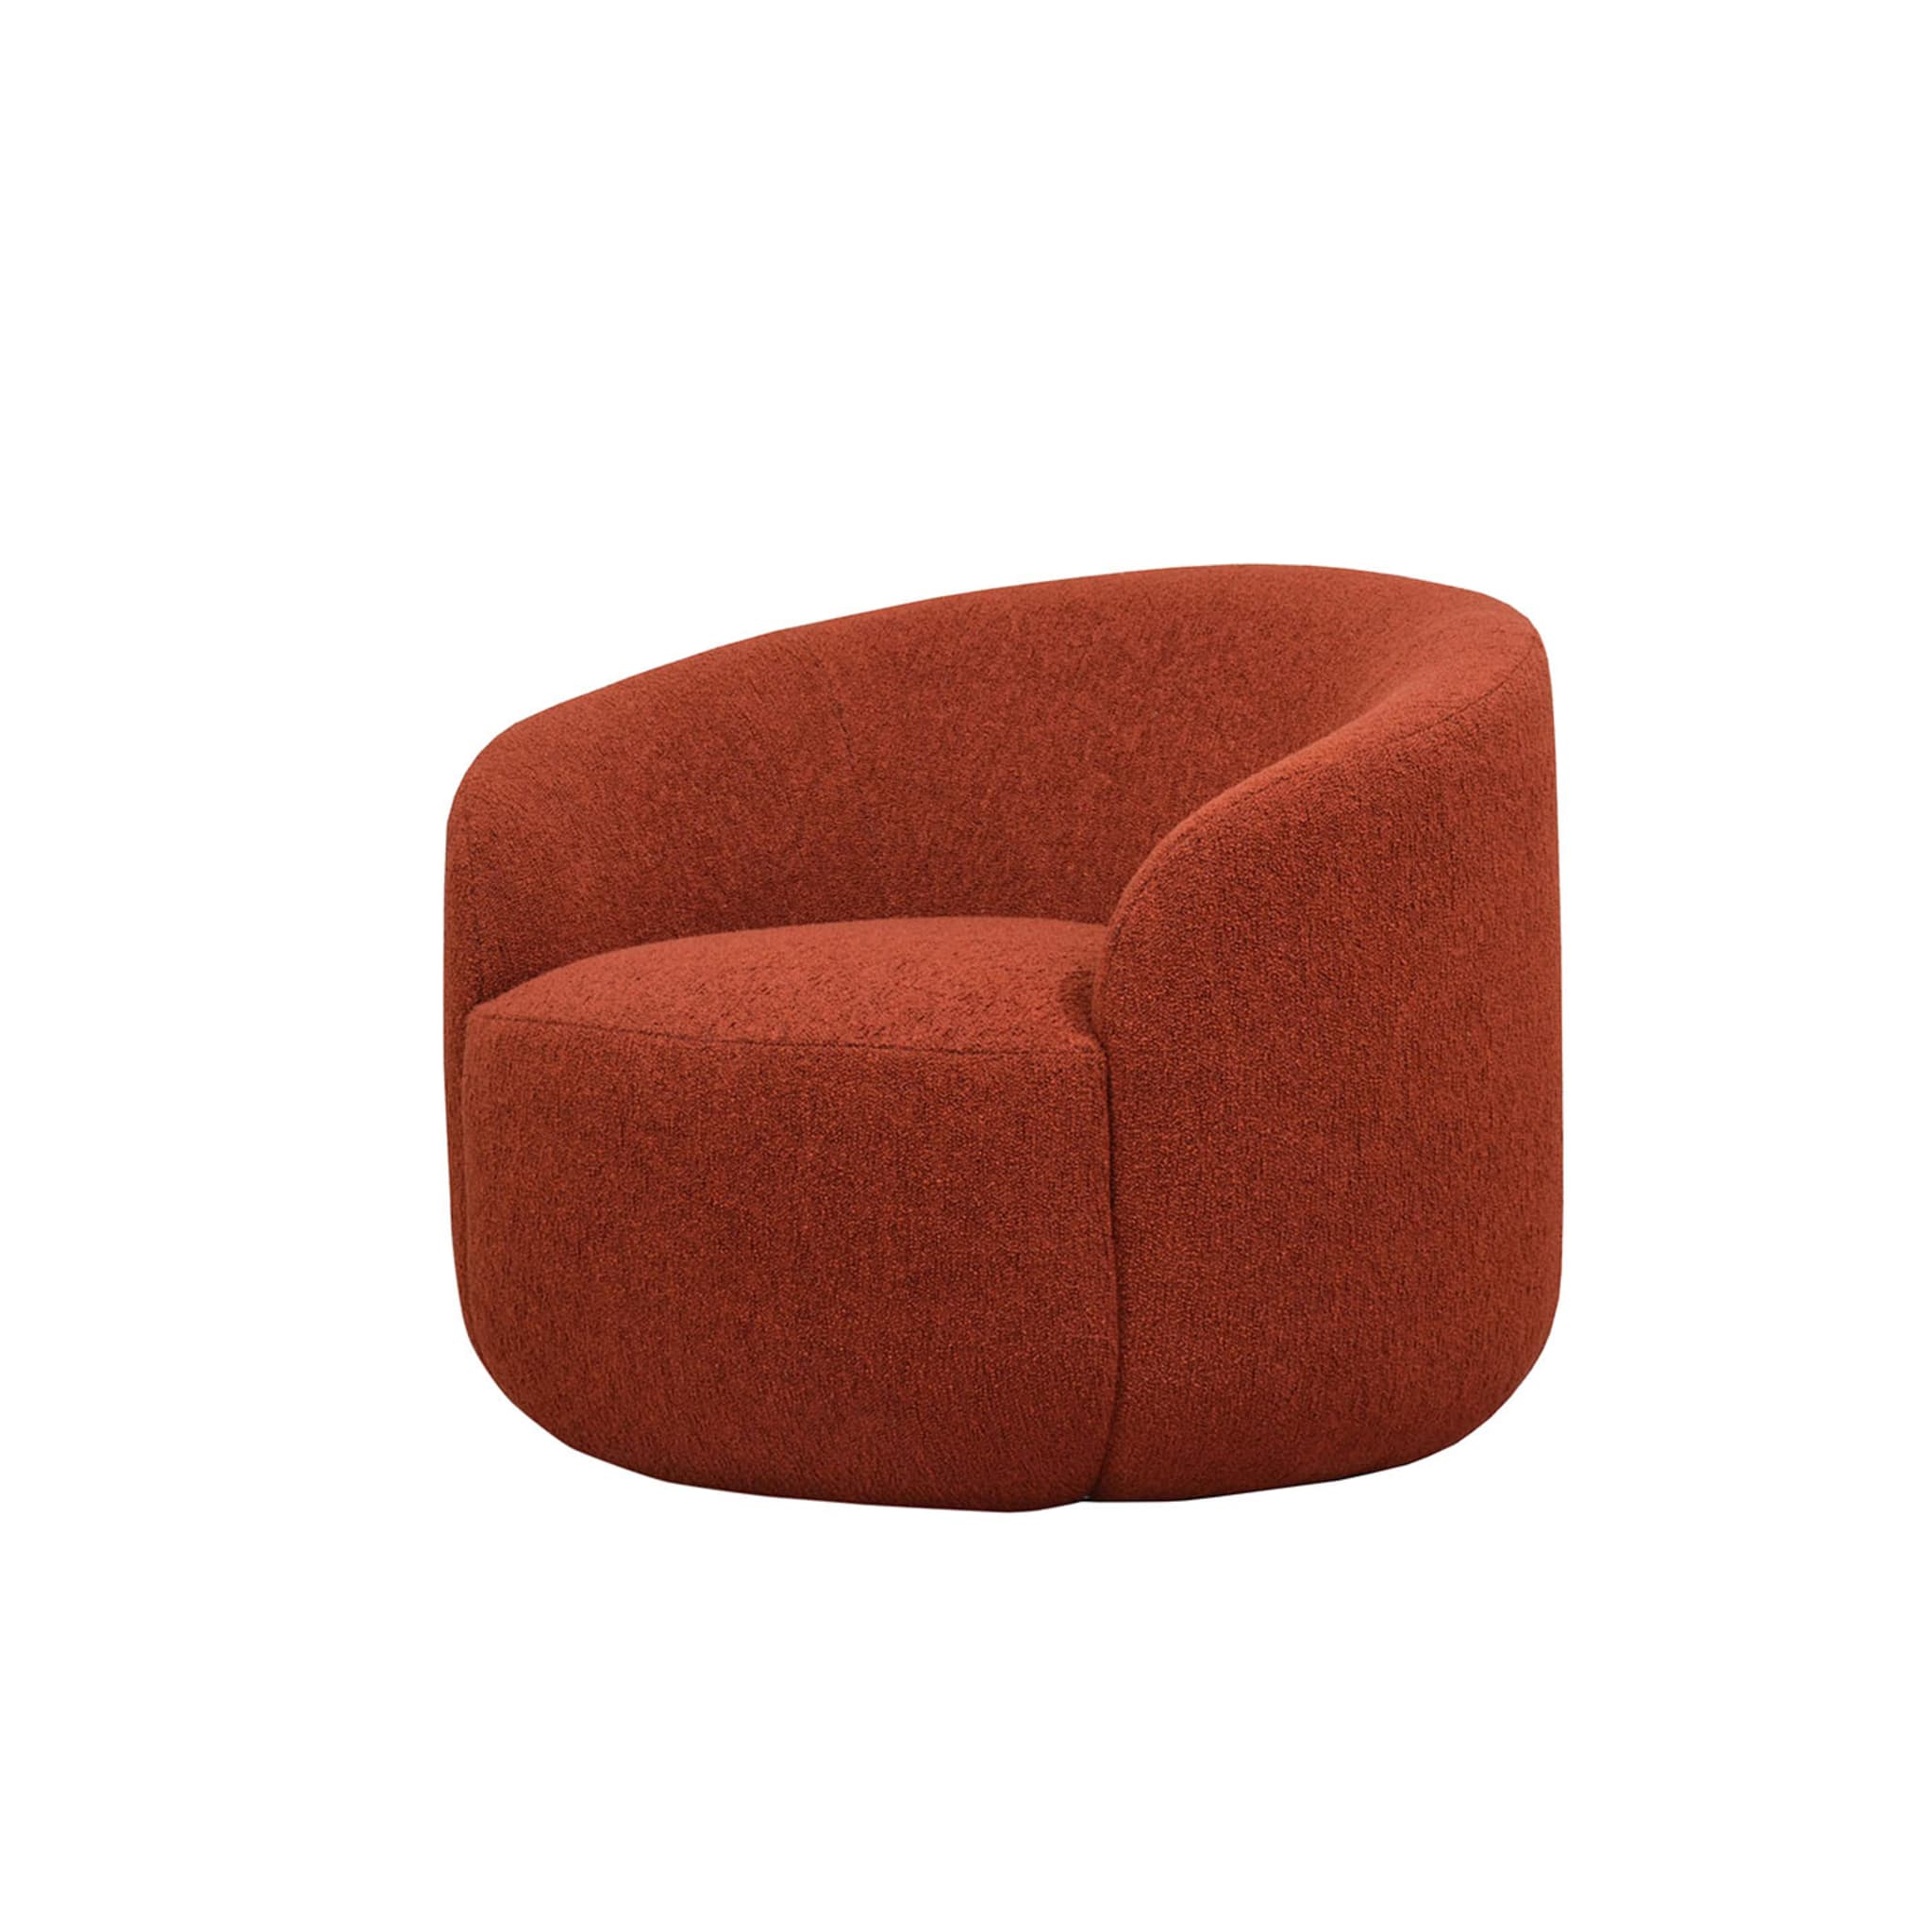 Cottonflower Lounge Armchair in Red Terracotta Fabric - Alternative view 1